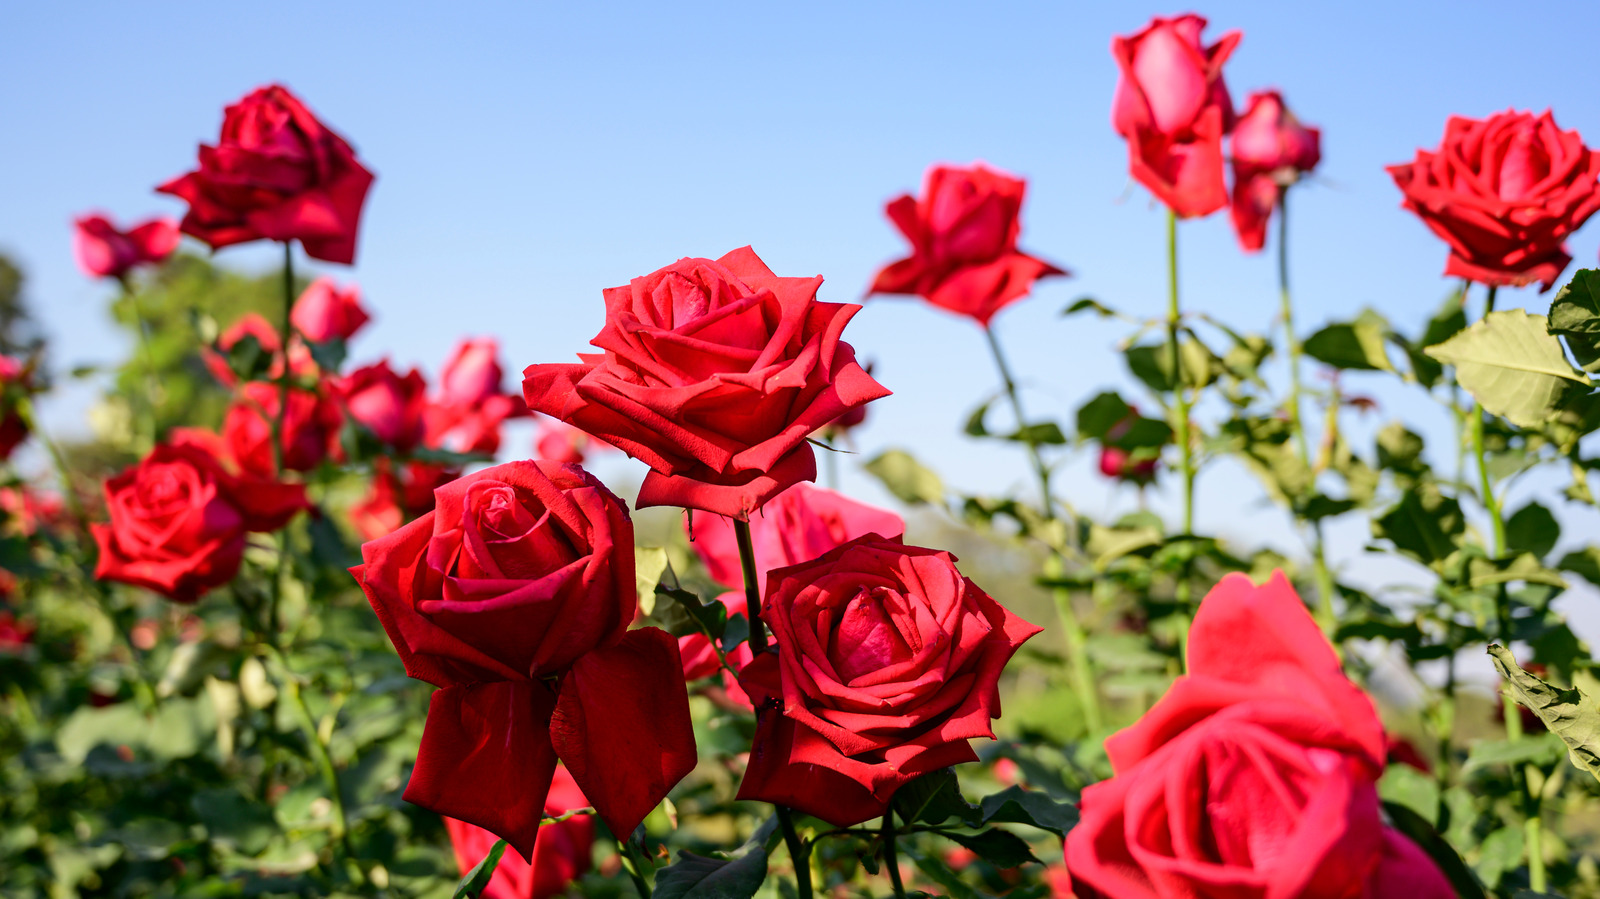 20 Best Ways To Get Rid Of Green Worms On Roses